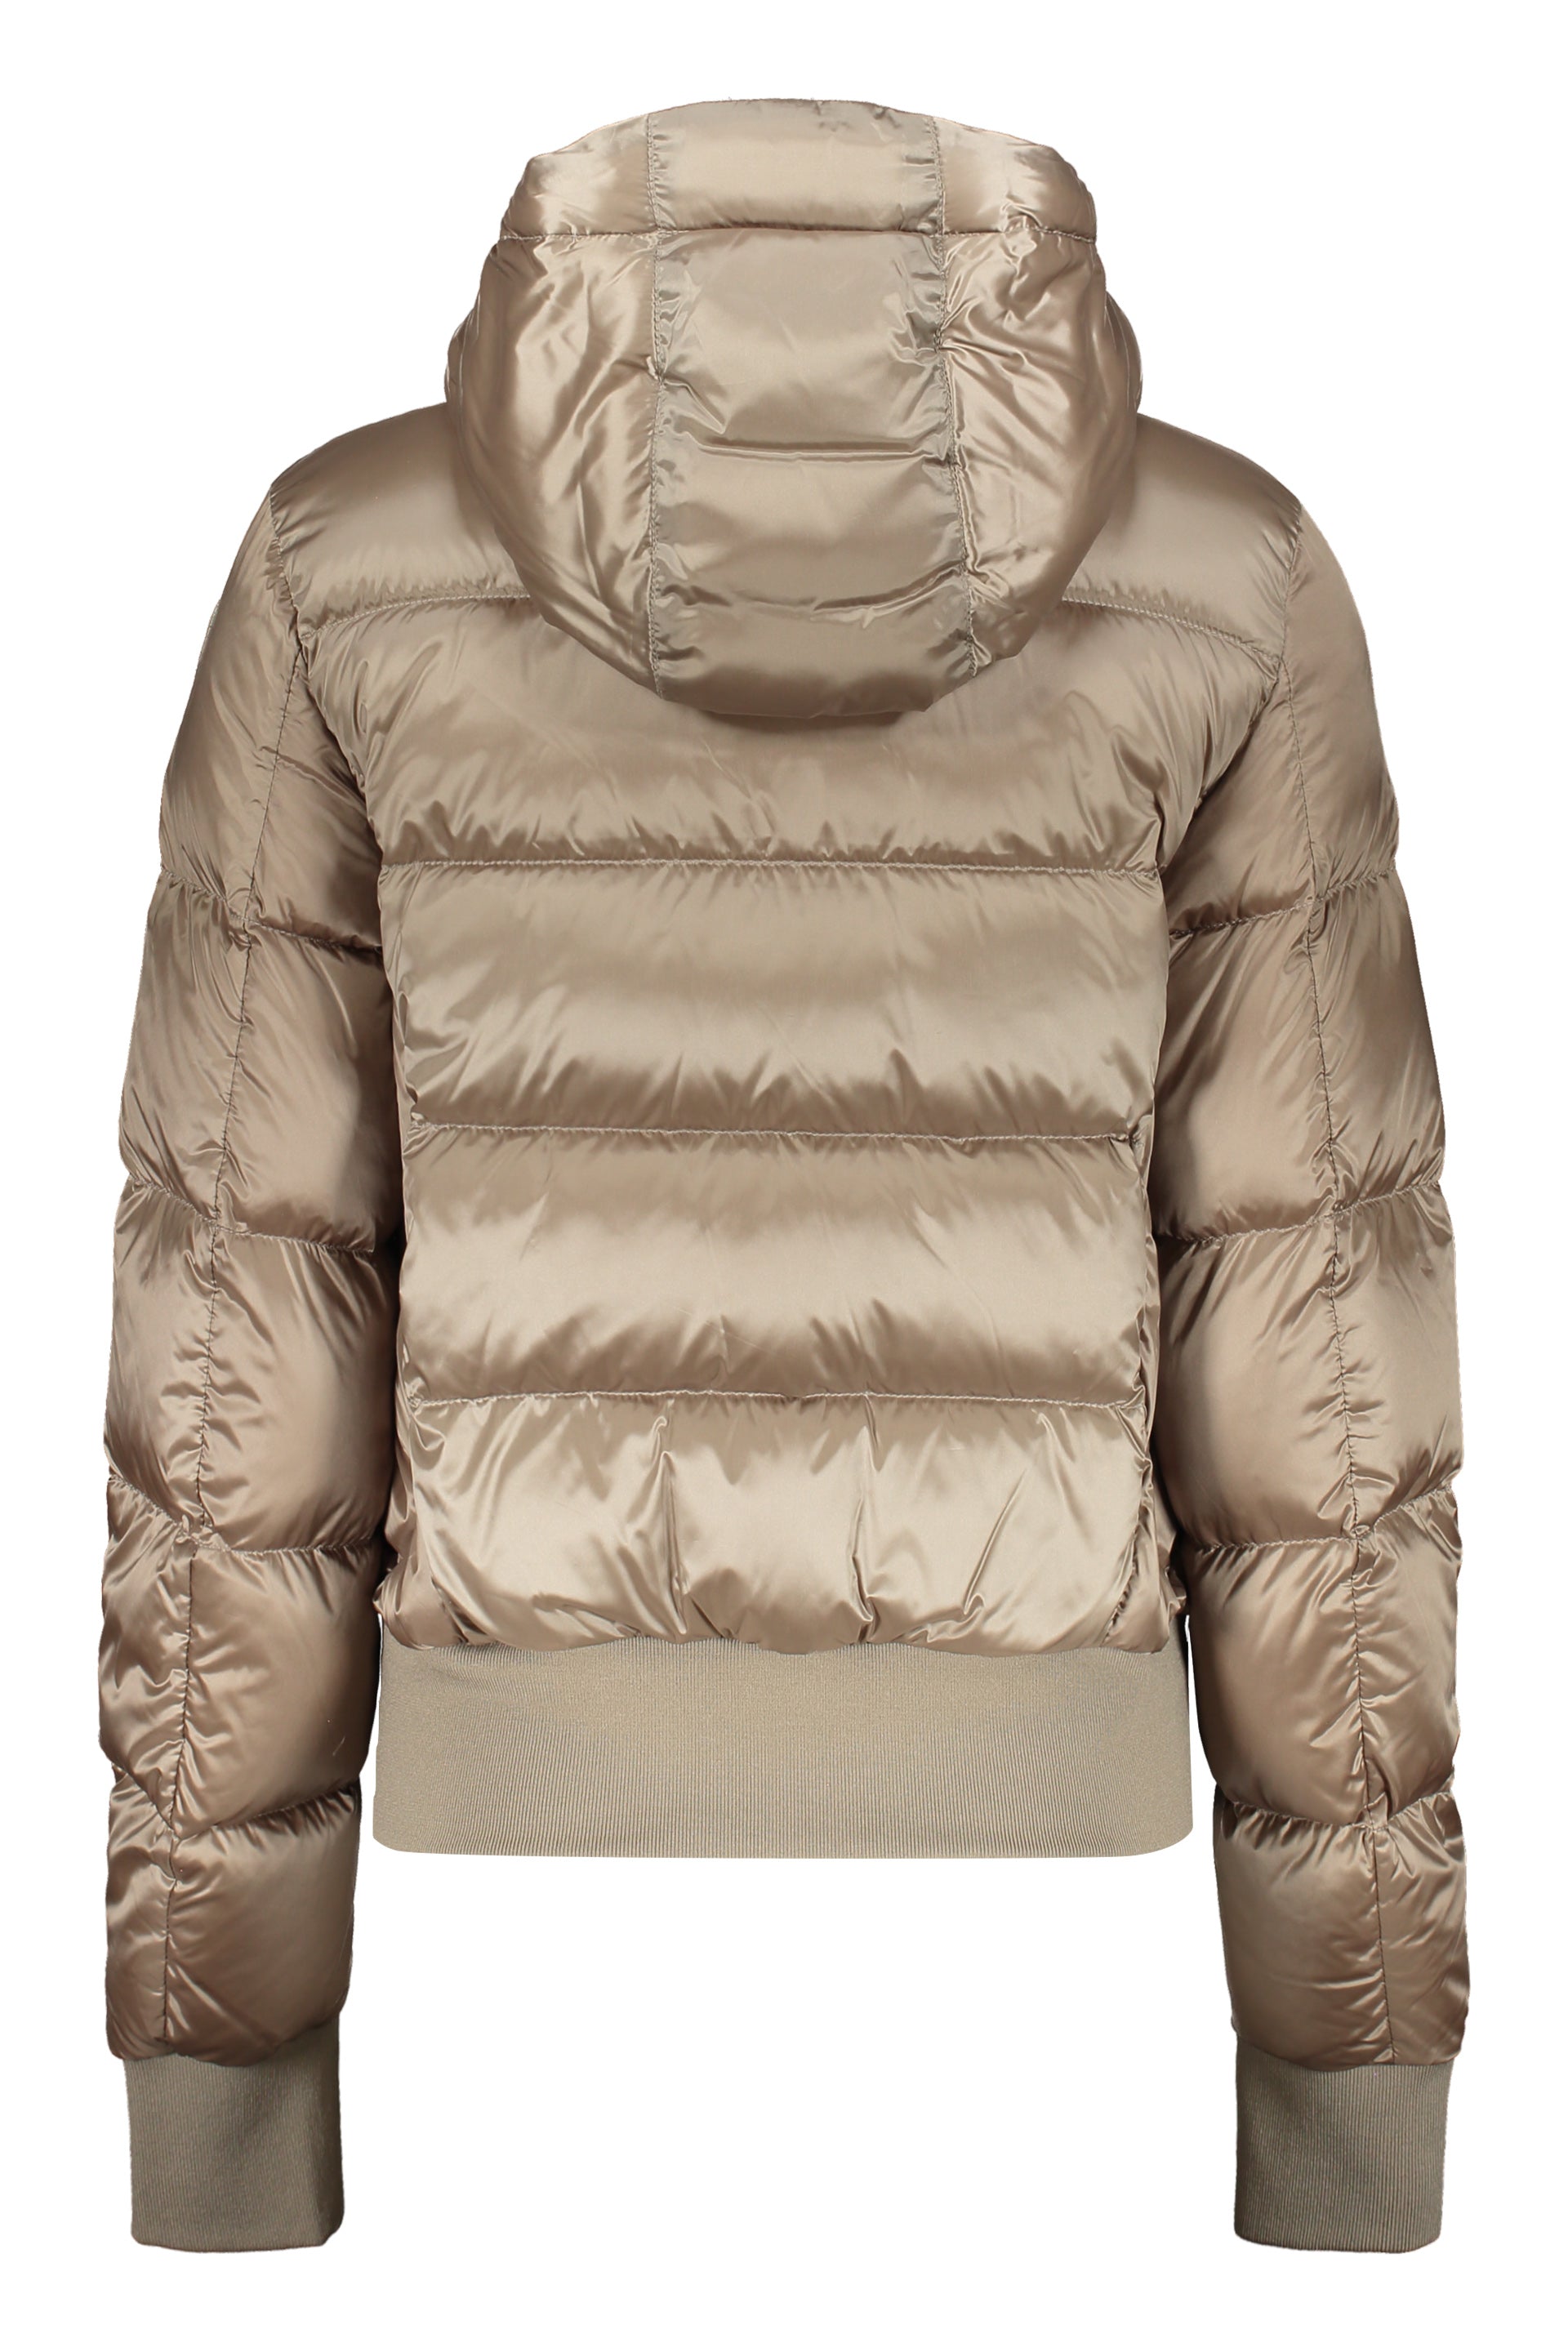 Parajumpers-OUTLET-SALE-Mariah-hooded-down-jacket-Jacken-Mantel-XS-ARCHIVE-COLLECTION-2.jpg